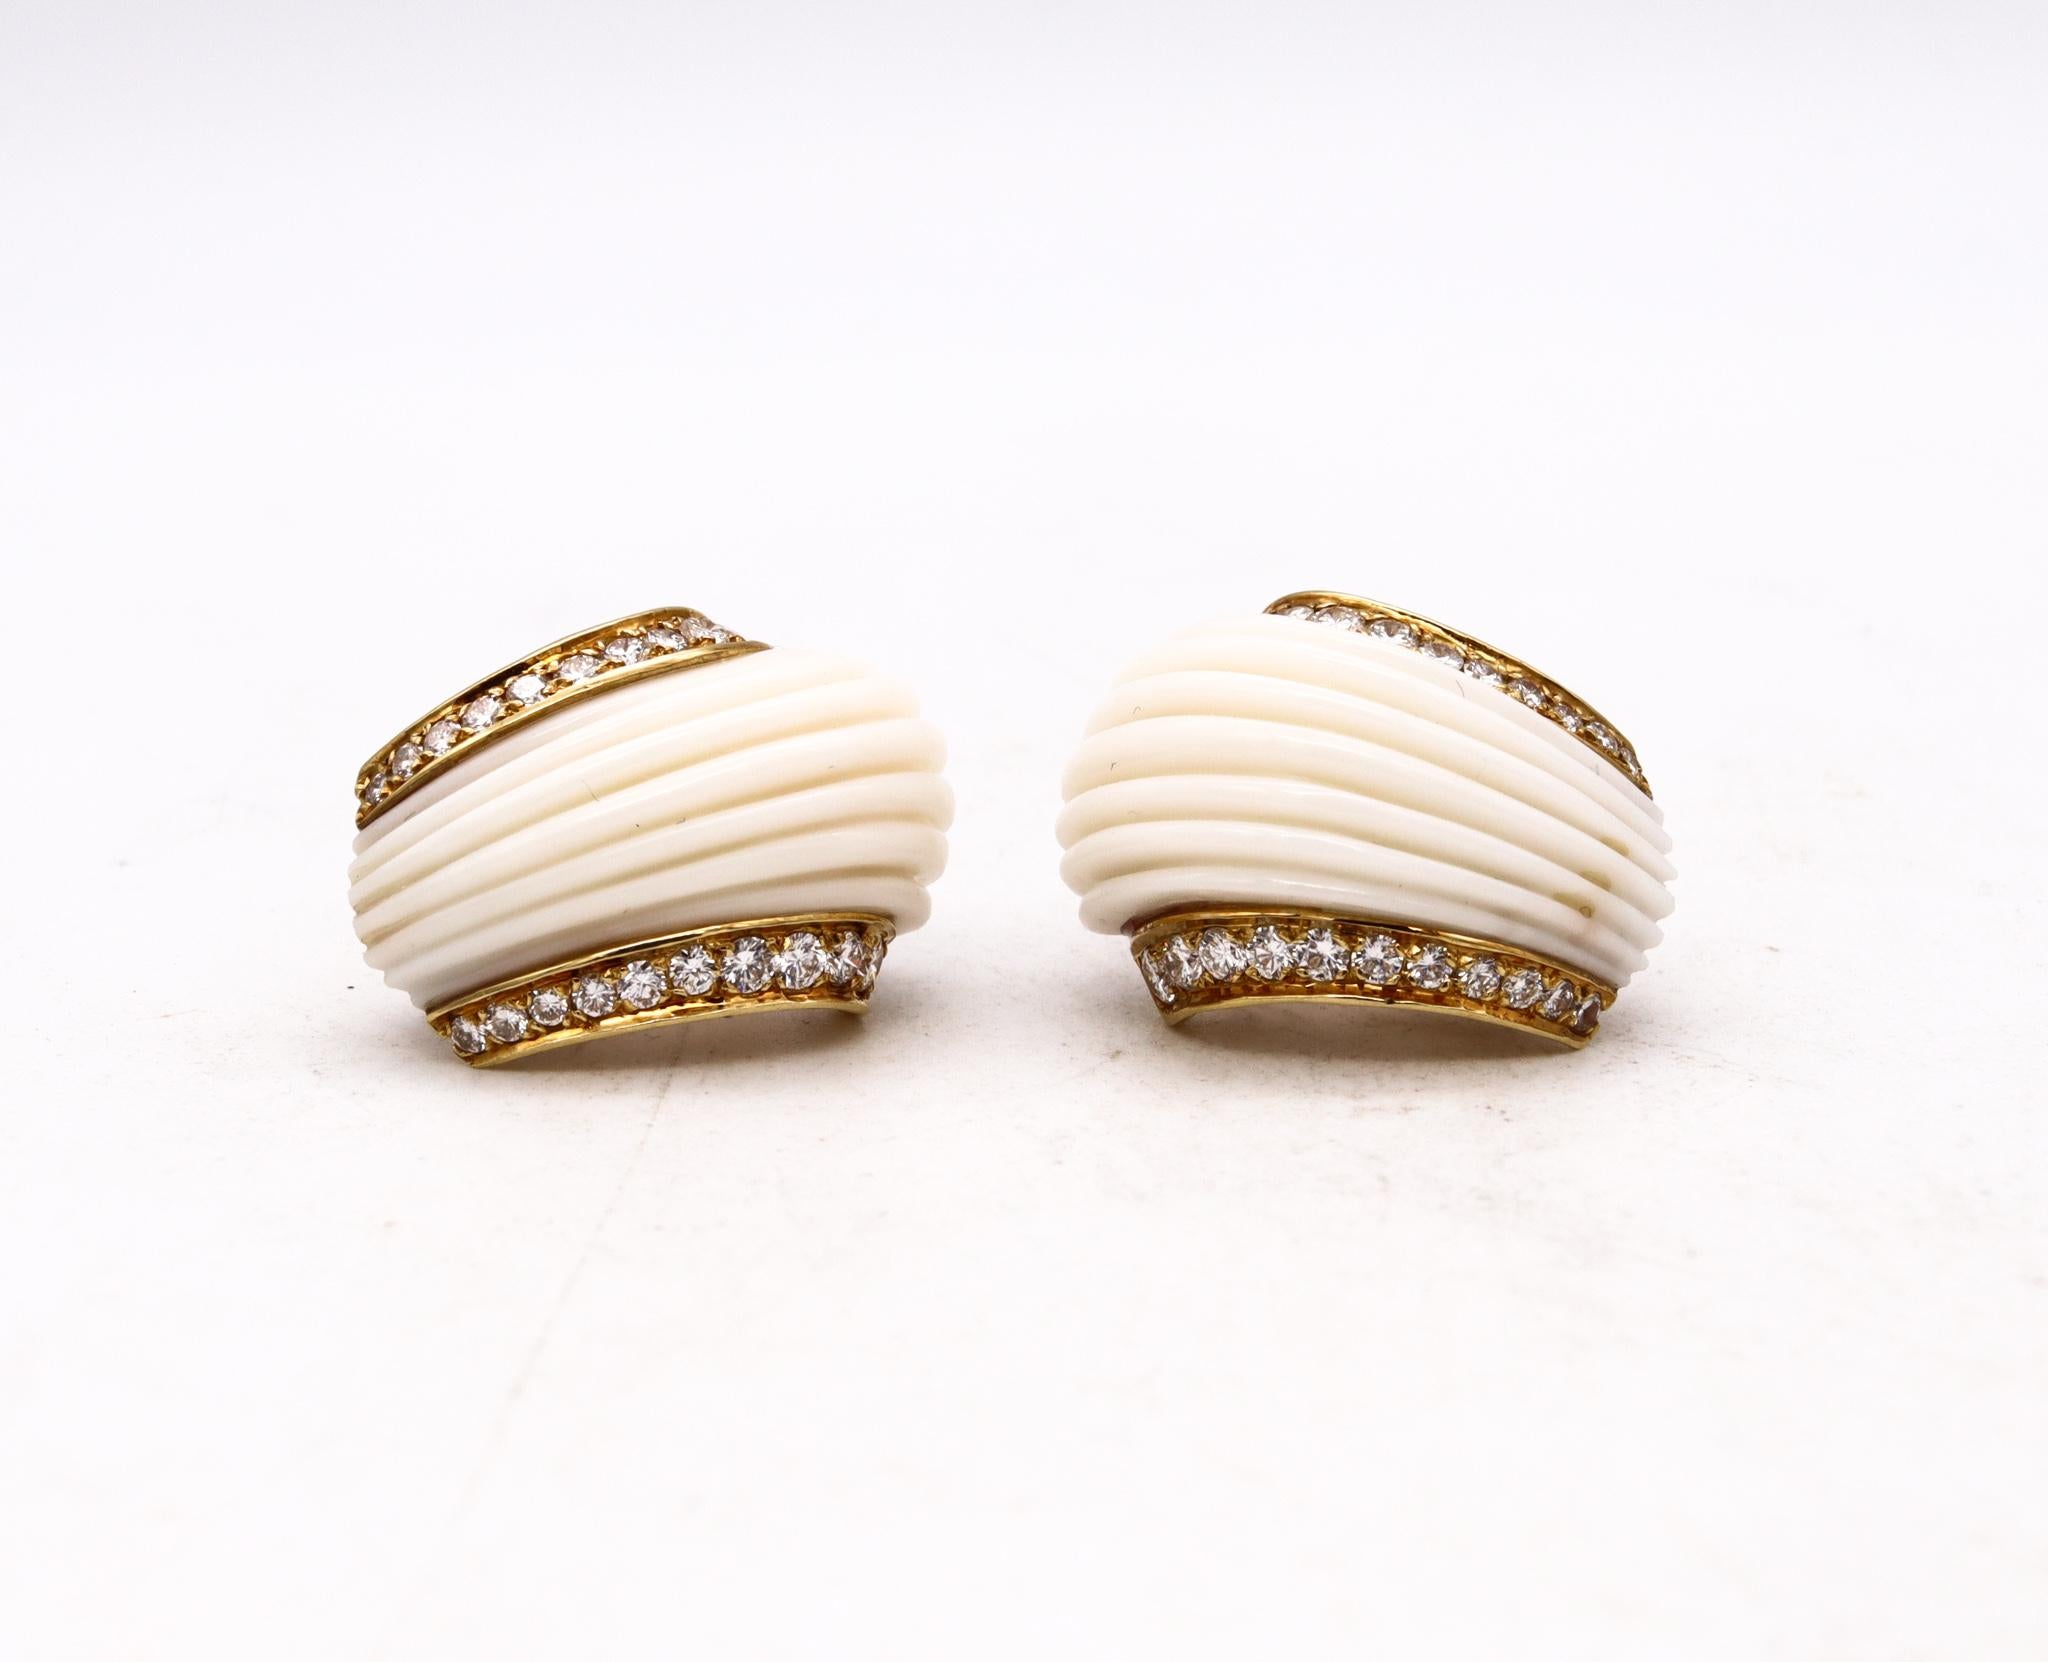 Modernist Charles Turi New York 18kt Gold Earrings with 2.42 Cts in Diamonds White Coral